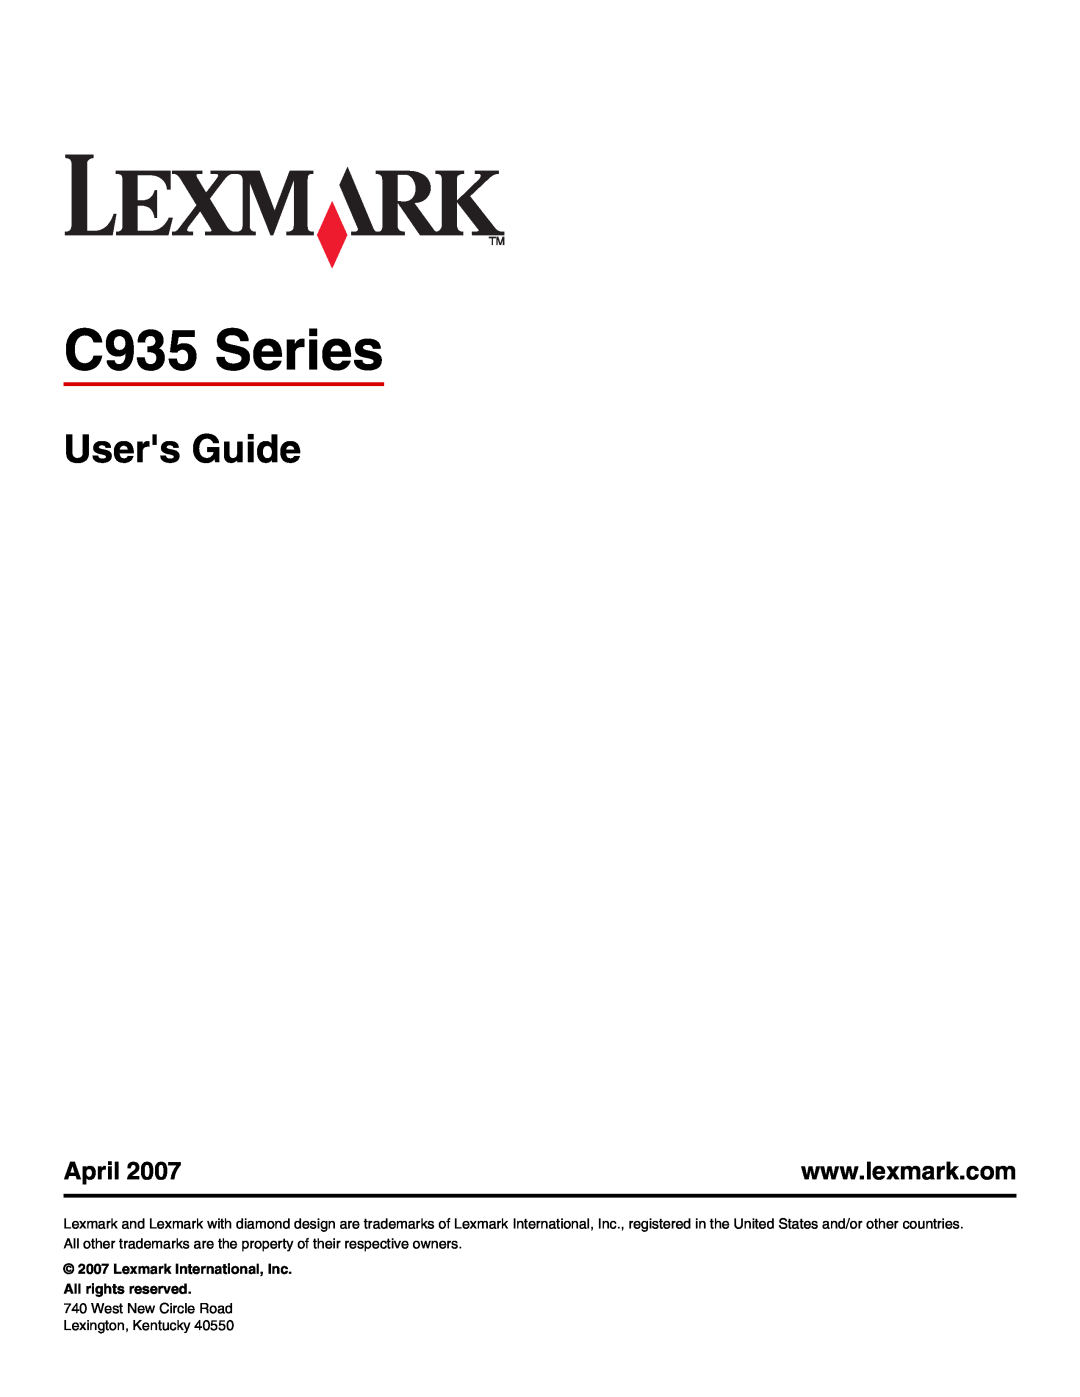 Lexmark manual Users Guide, April, C935 Series, Lexmark International, Inc. All rights reserved 